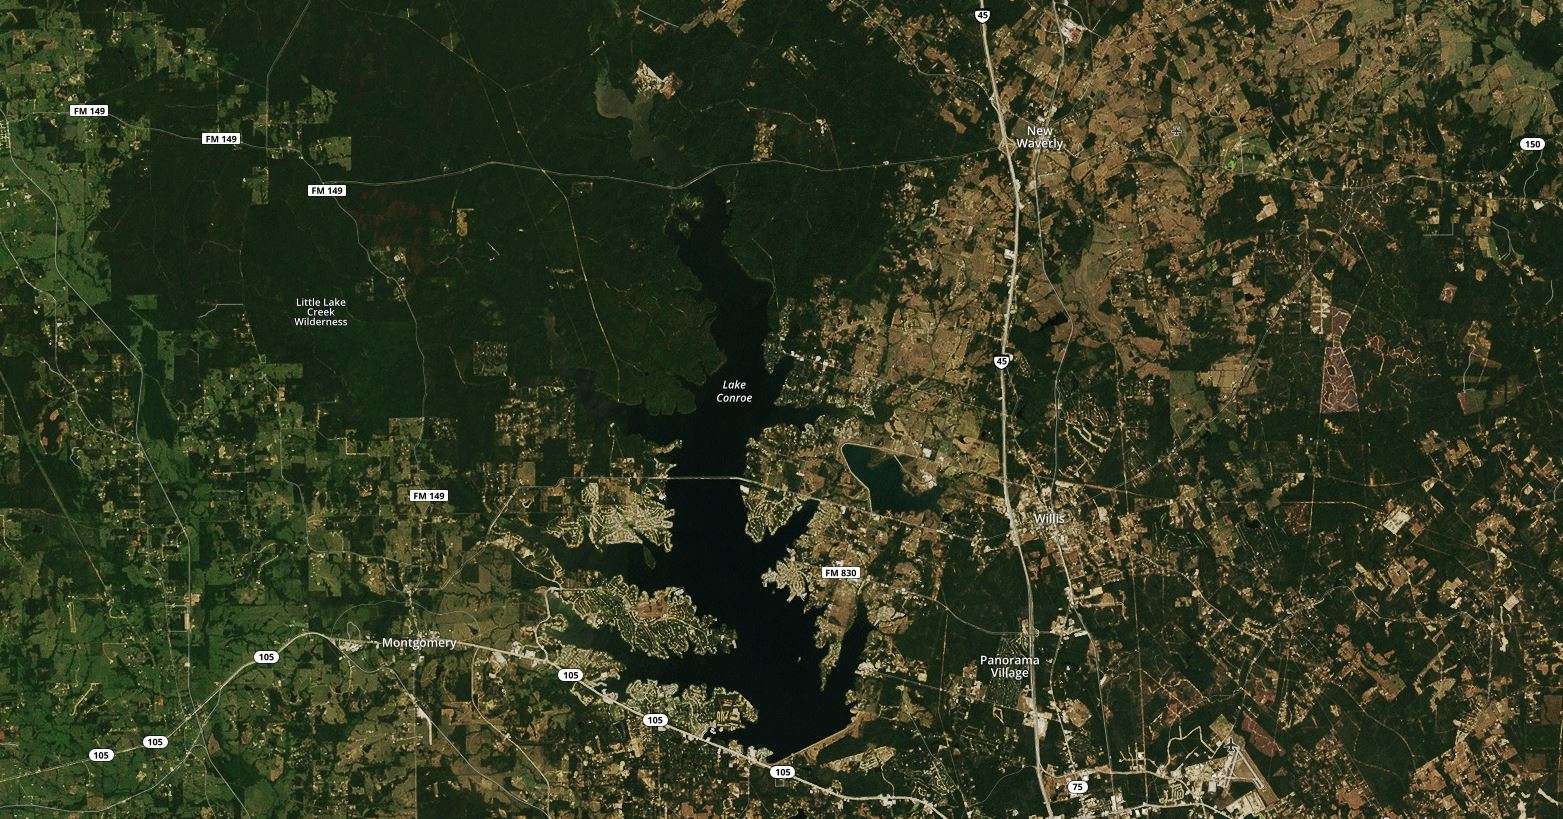 Lake Conroe, a 21,000-acre fishery, is where 52 anglers will compete for Bassmaster Classic glory. Lake Conroe is an impoundment of the San Jacinto River in Montgomery and Walker counties noted for producing big largemouth bass.